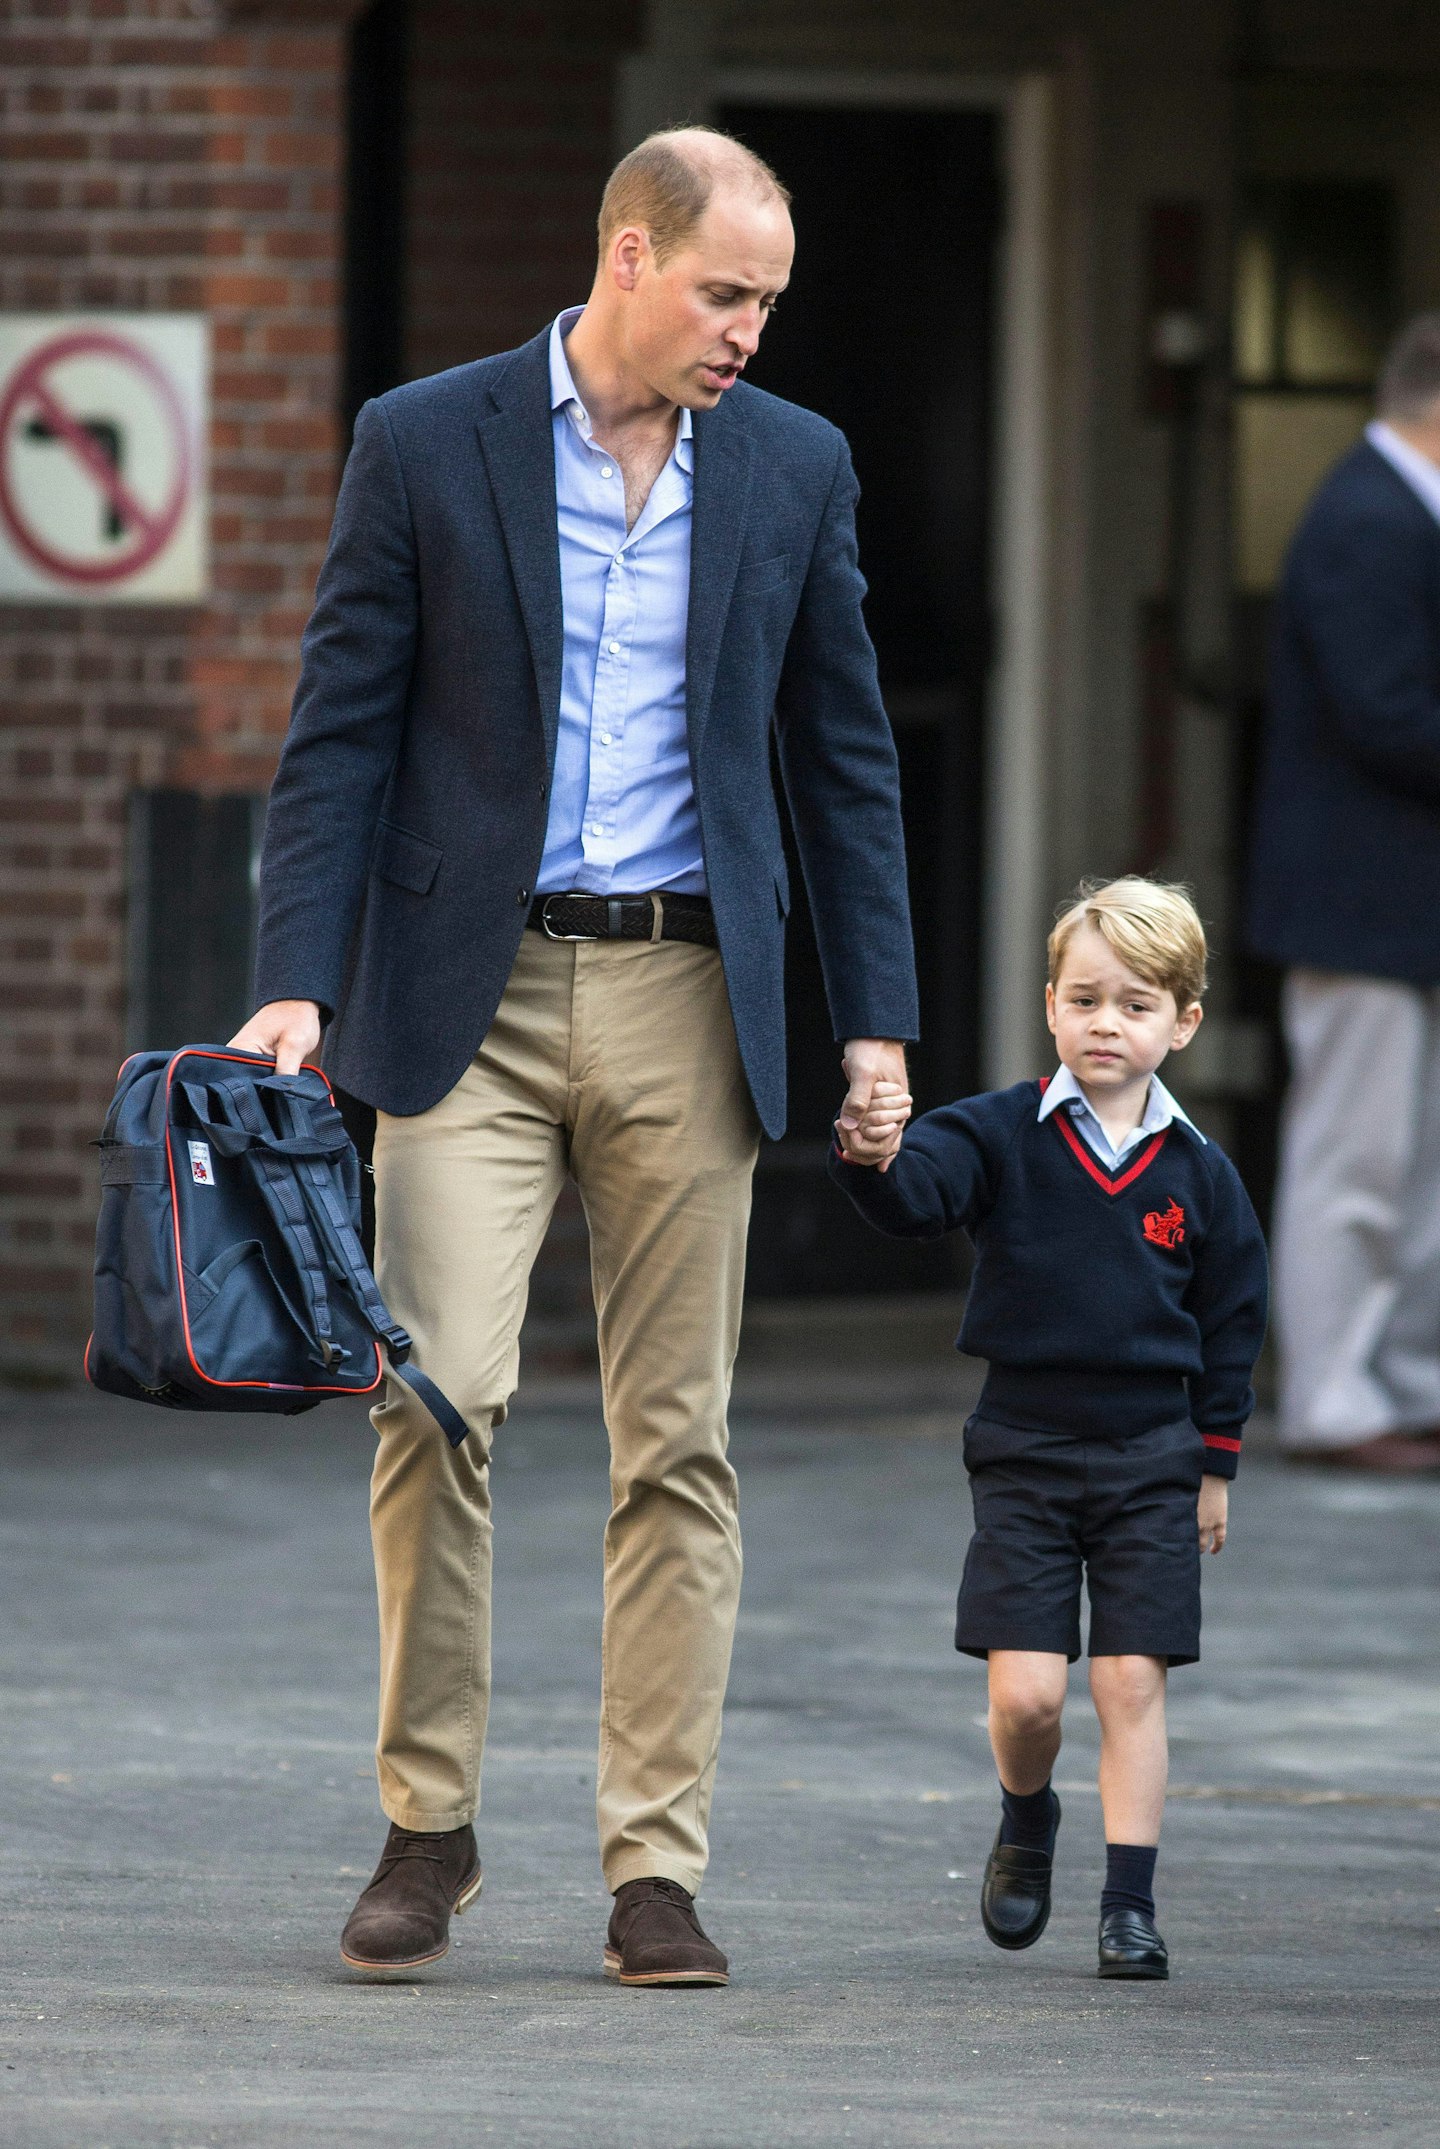 Prince George arriving with the Duke of Cambridge at Thomas's Battersea in London